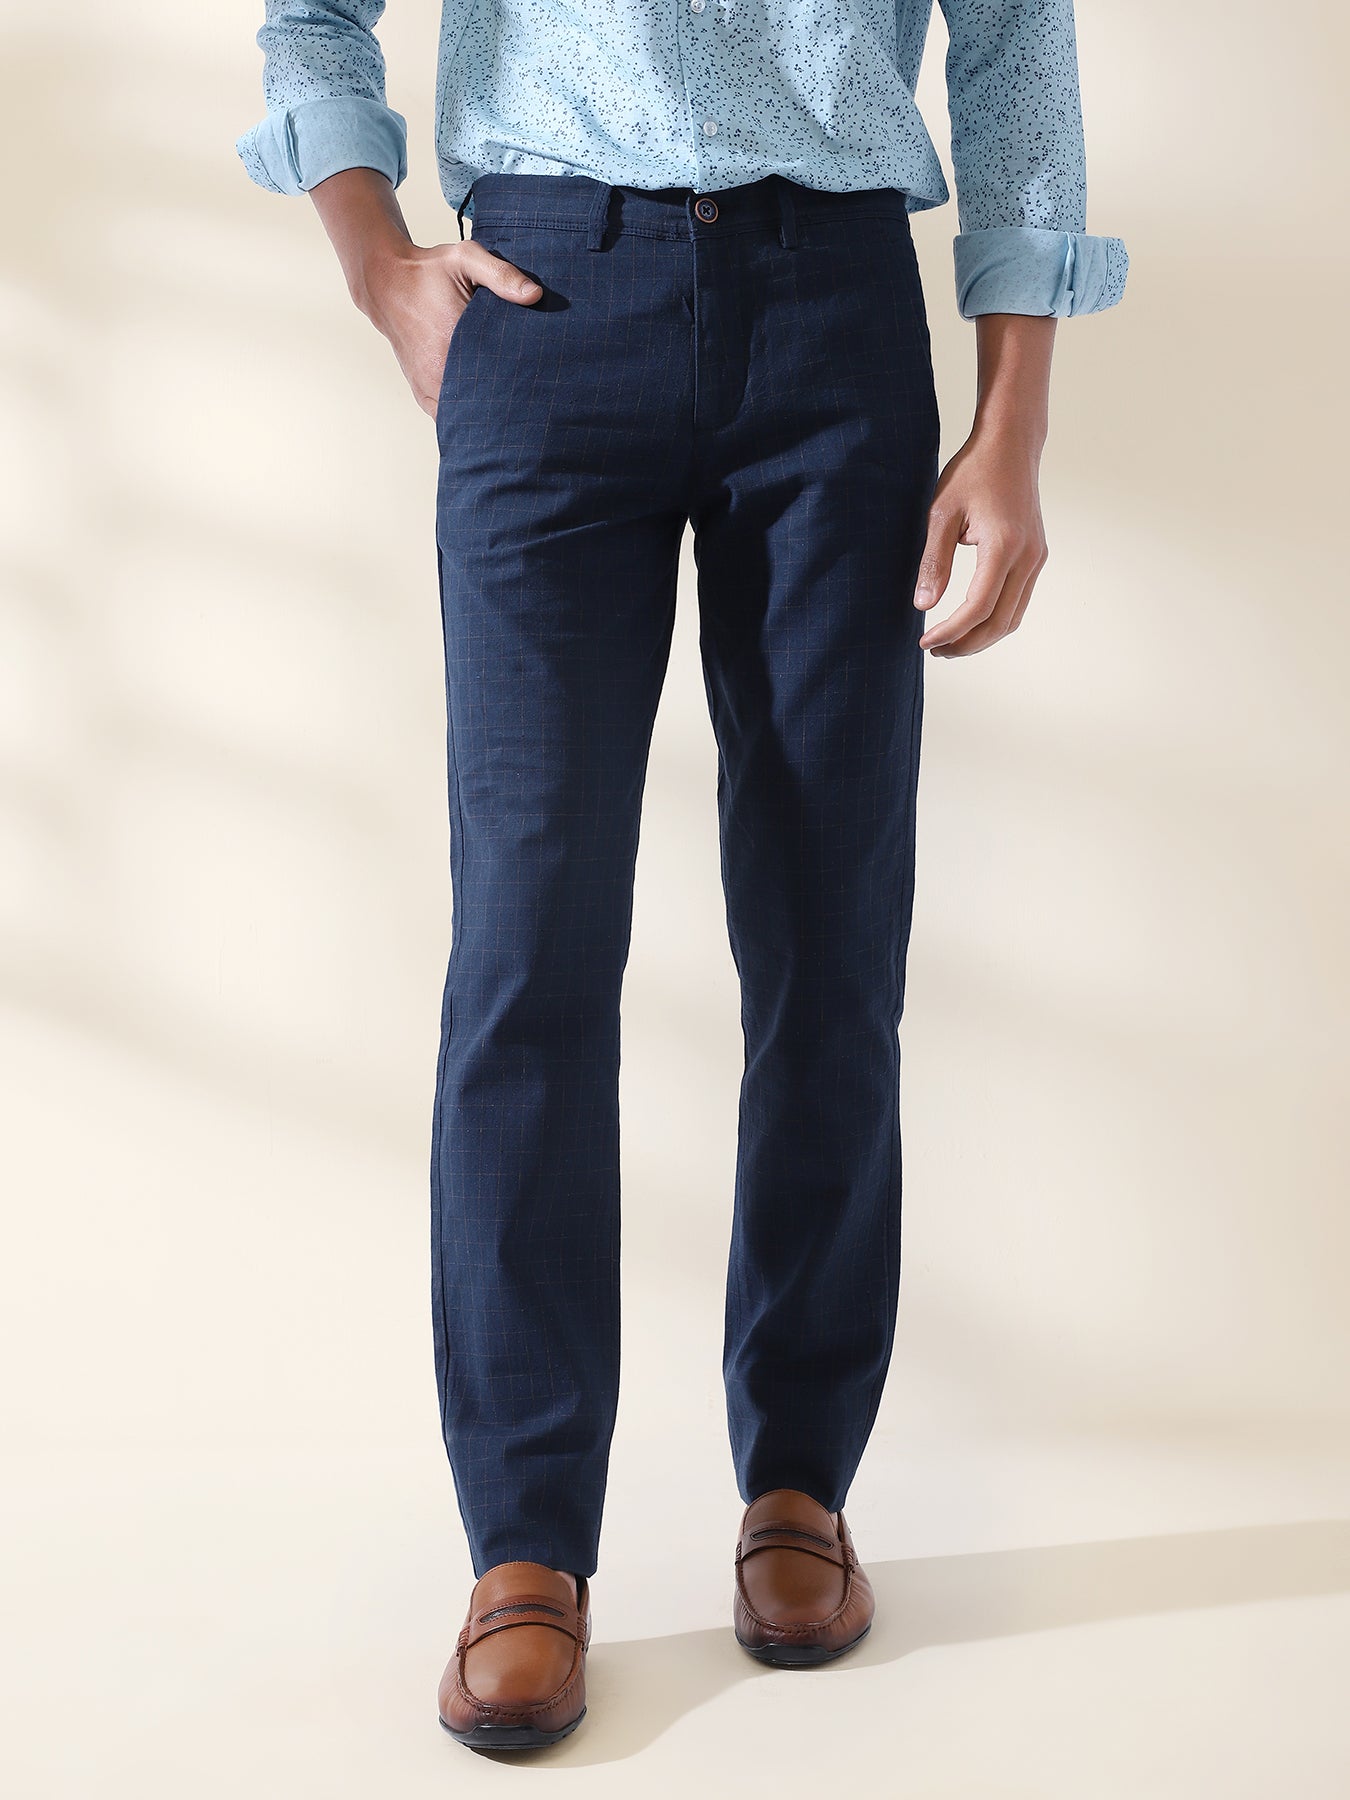 Cotton Linen Navy Blue Checkered Flat Front Casual Trouser